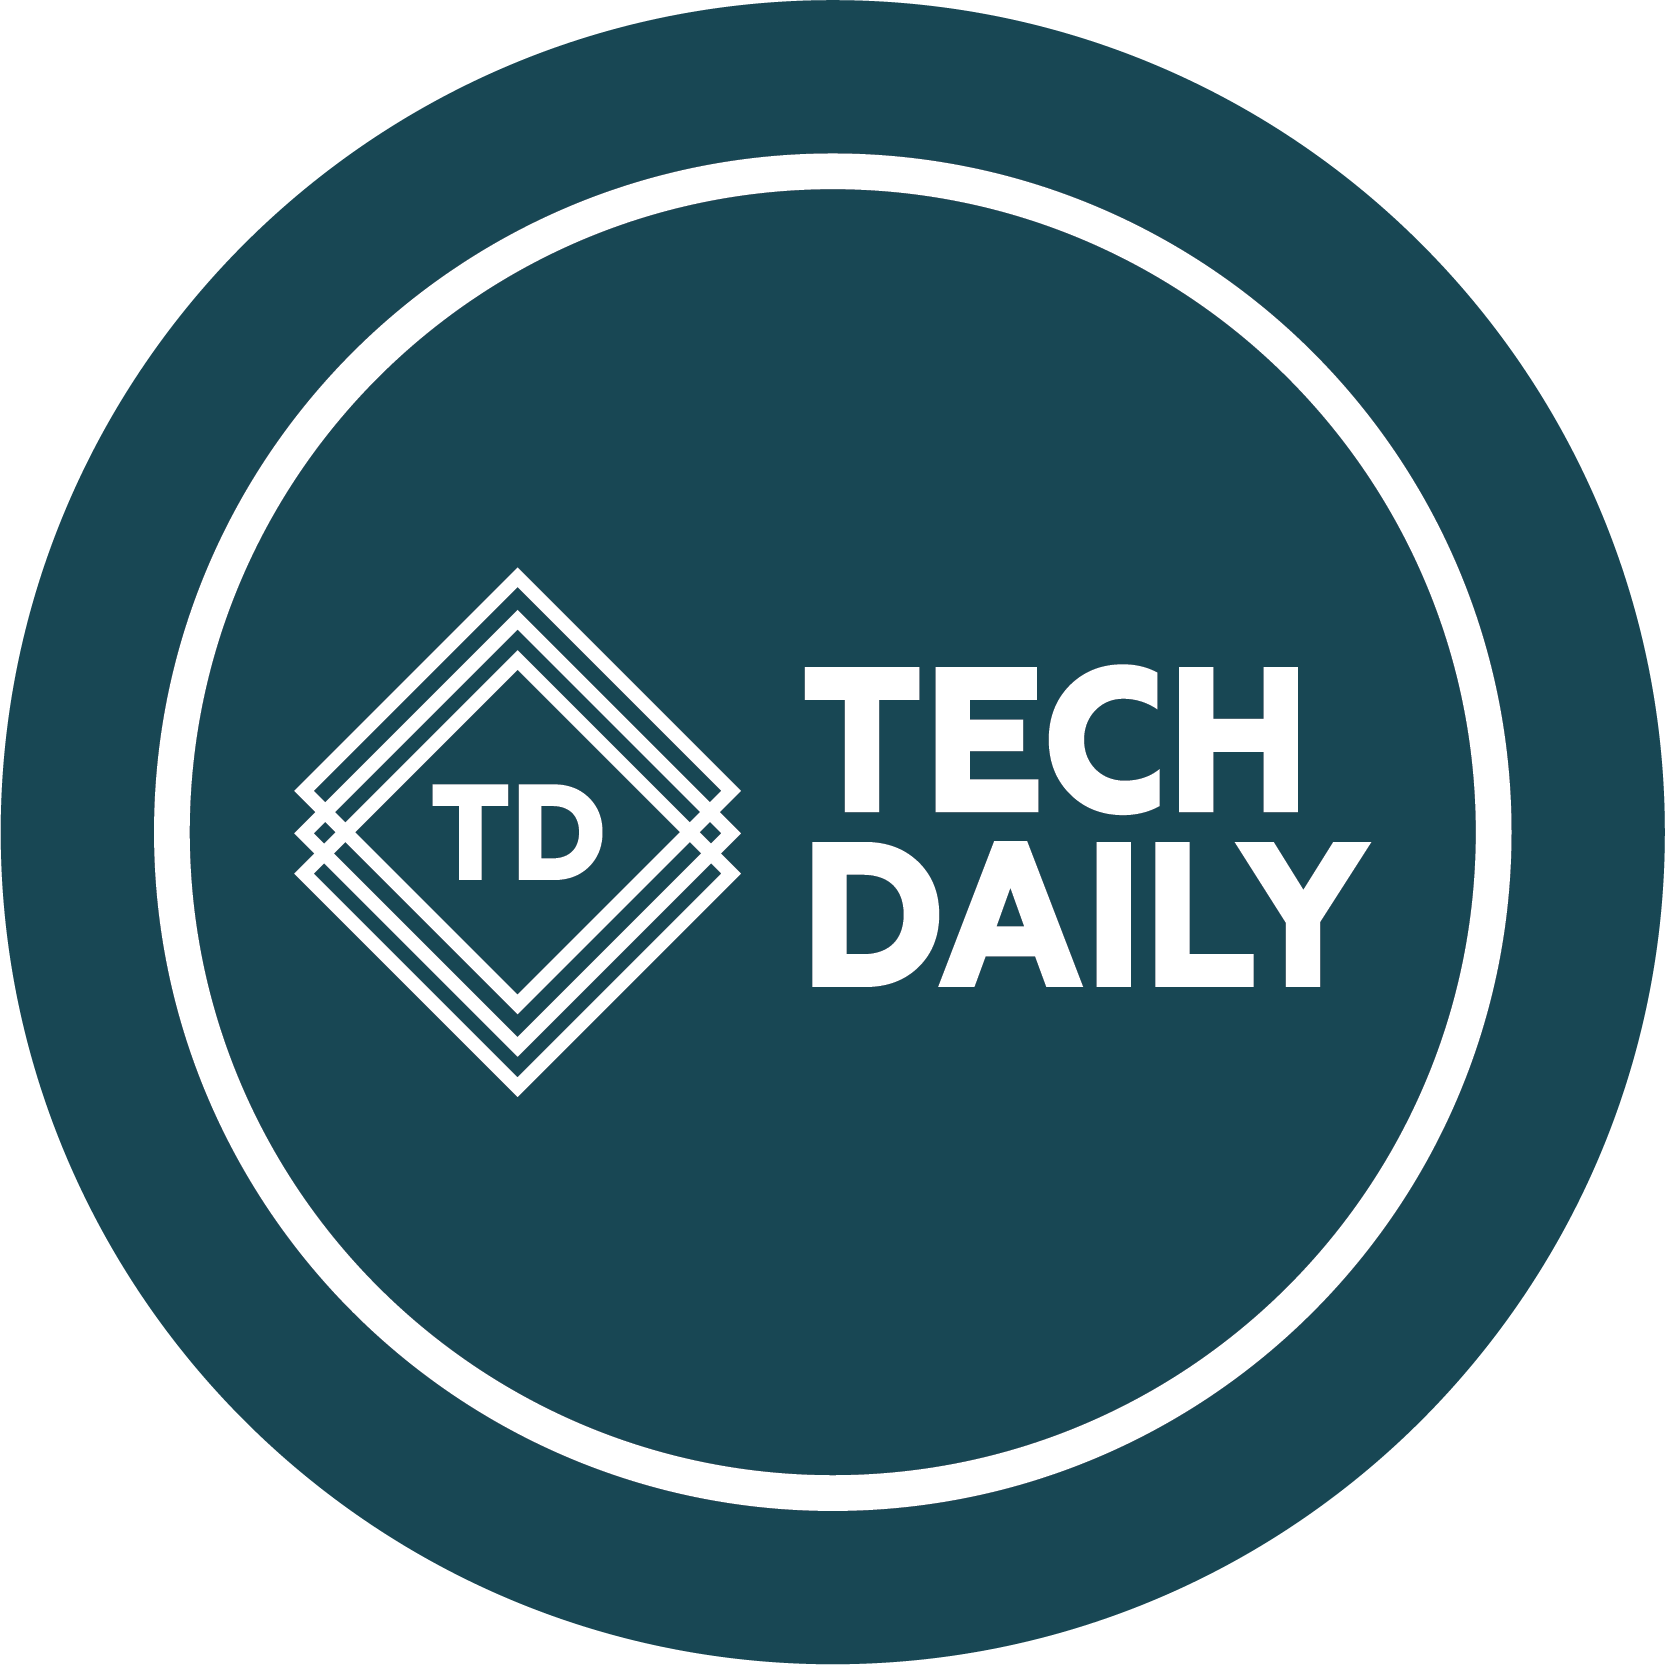 Media Review - Techdaily